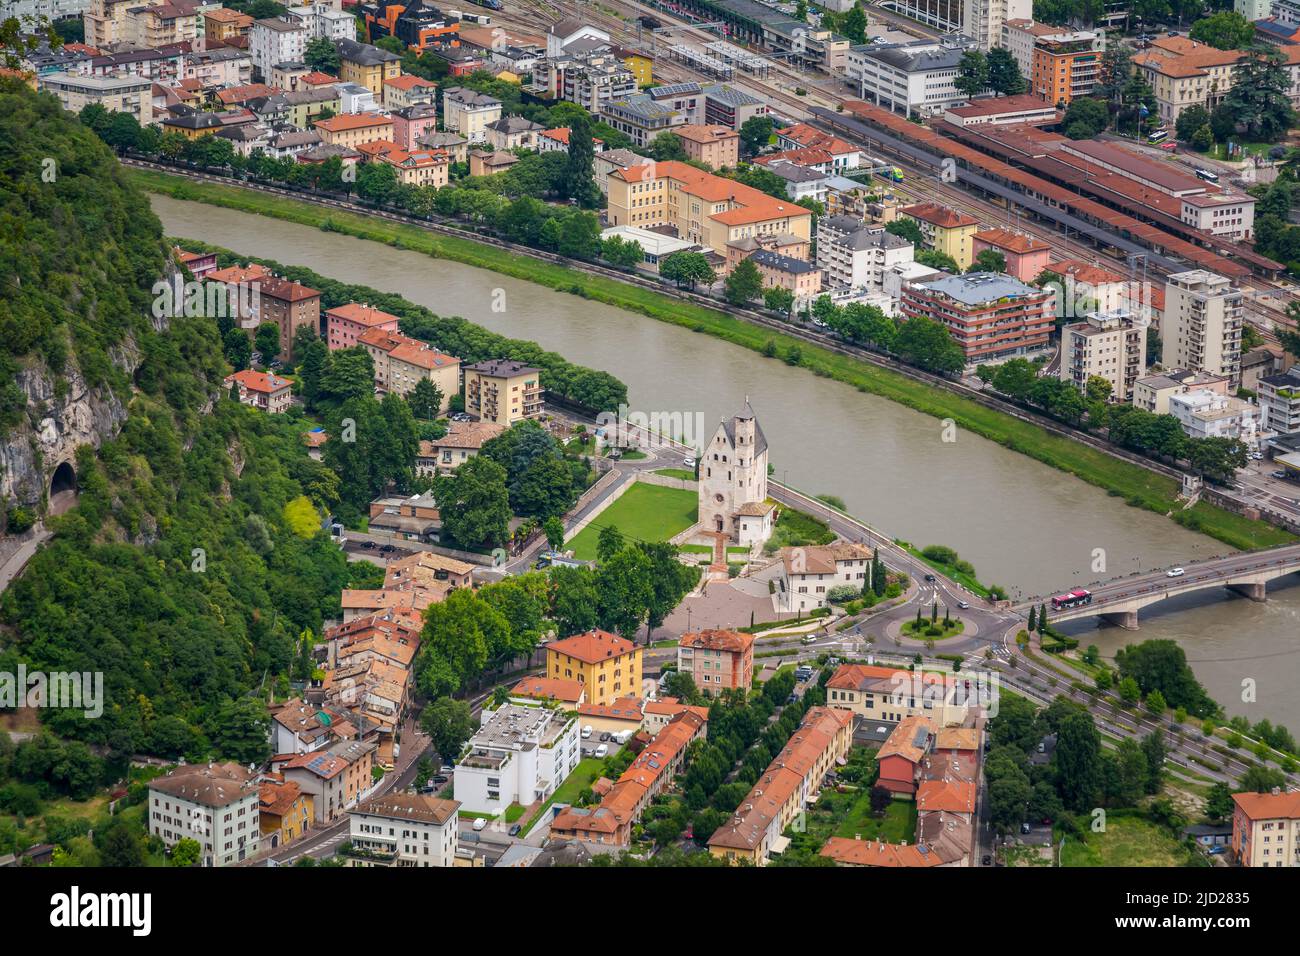 panoramic view of the city of trento from Sardagna, a town in the province of Trento, Trentino Alto Adige, northern Italy Stock Photo